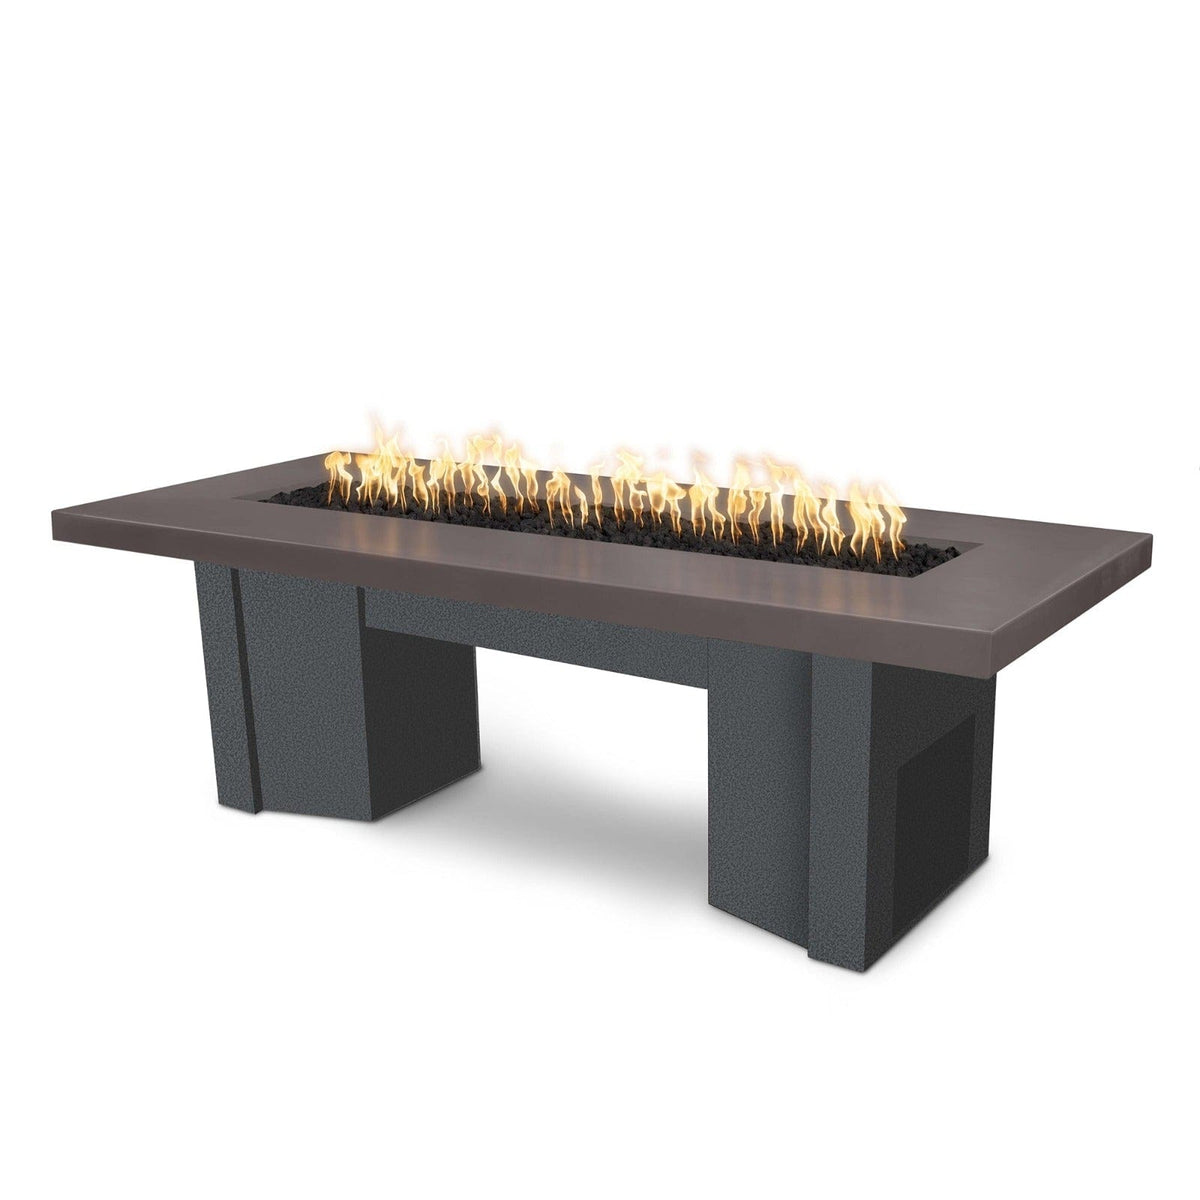 The Outdoor Plus Fire Features Chestnut (-CST) / Silver Vein Powder Coated Steel (-SLV) The Outdoor Plus 78&quot; Alameda Fire Table Smooth Concrete in Natural Gas - 110V Plug &amp; Play Electronic Ignition / OPT-ALMGFRC78EKIT-NG